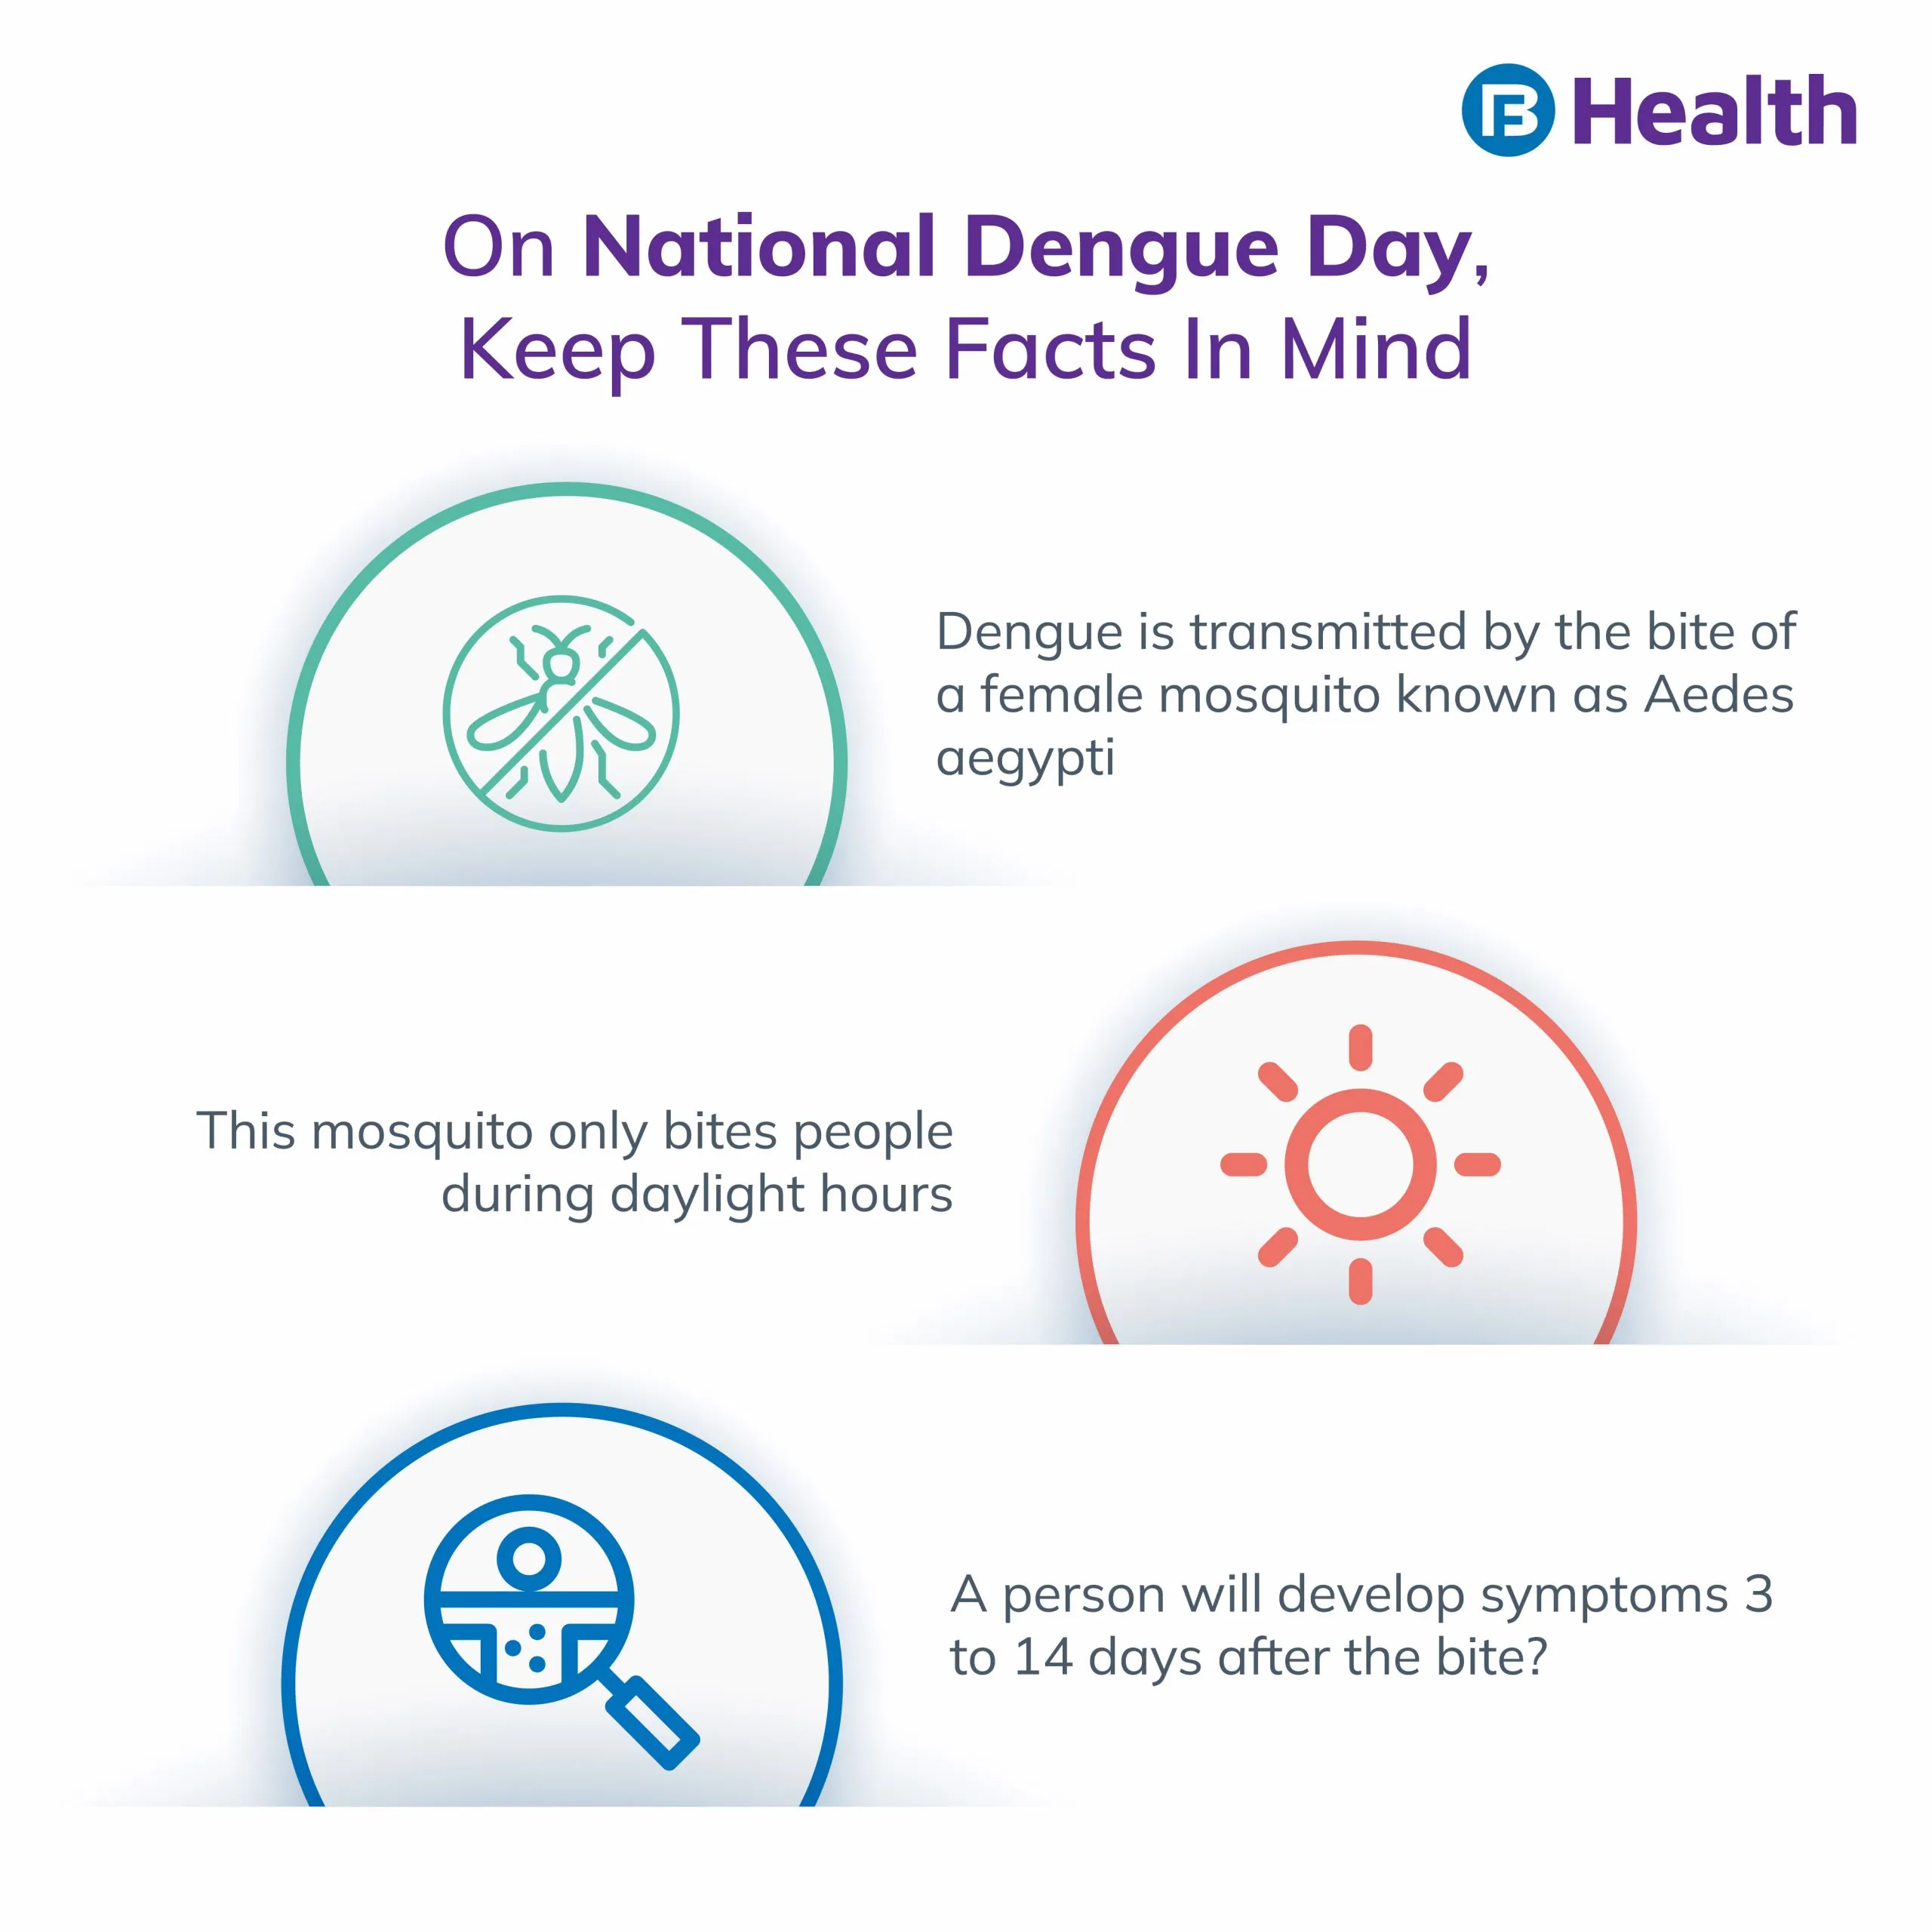 Facts about Dengue